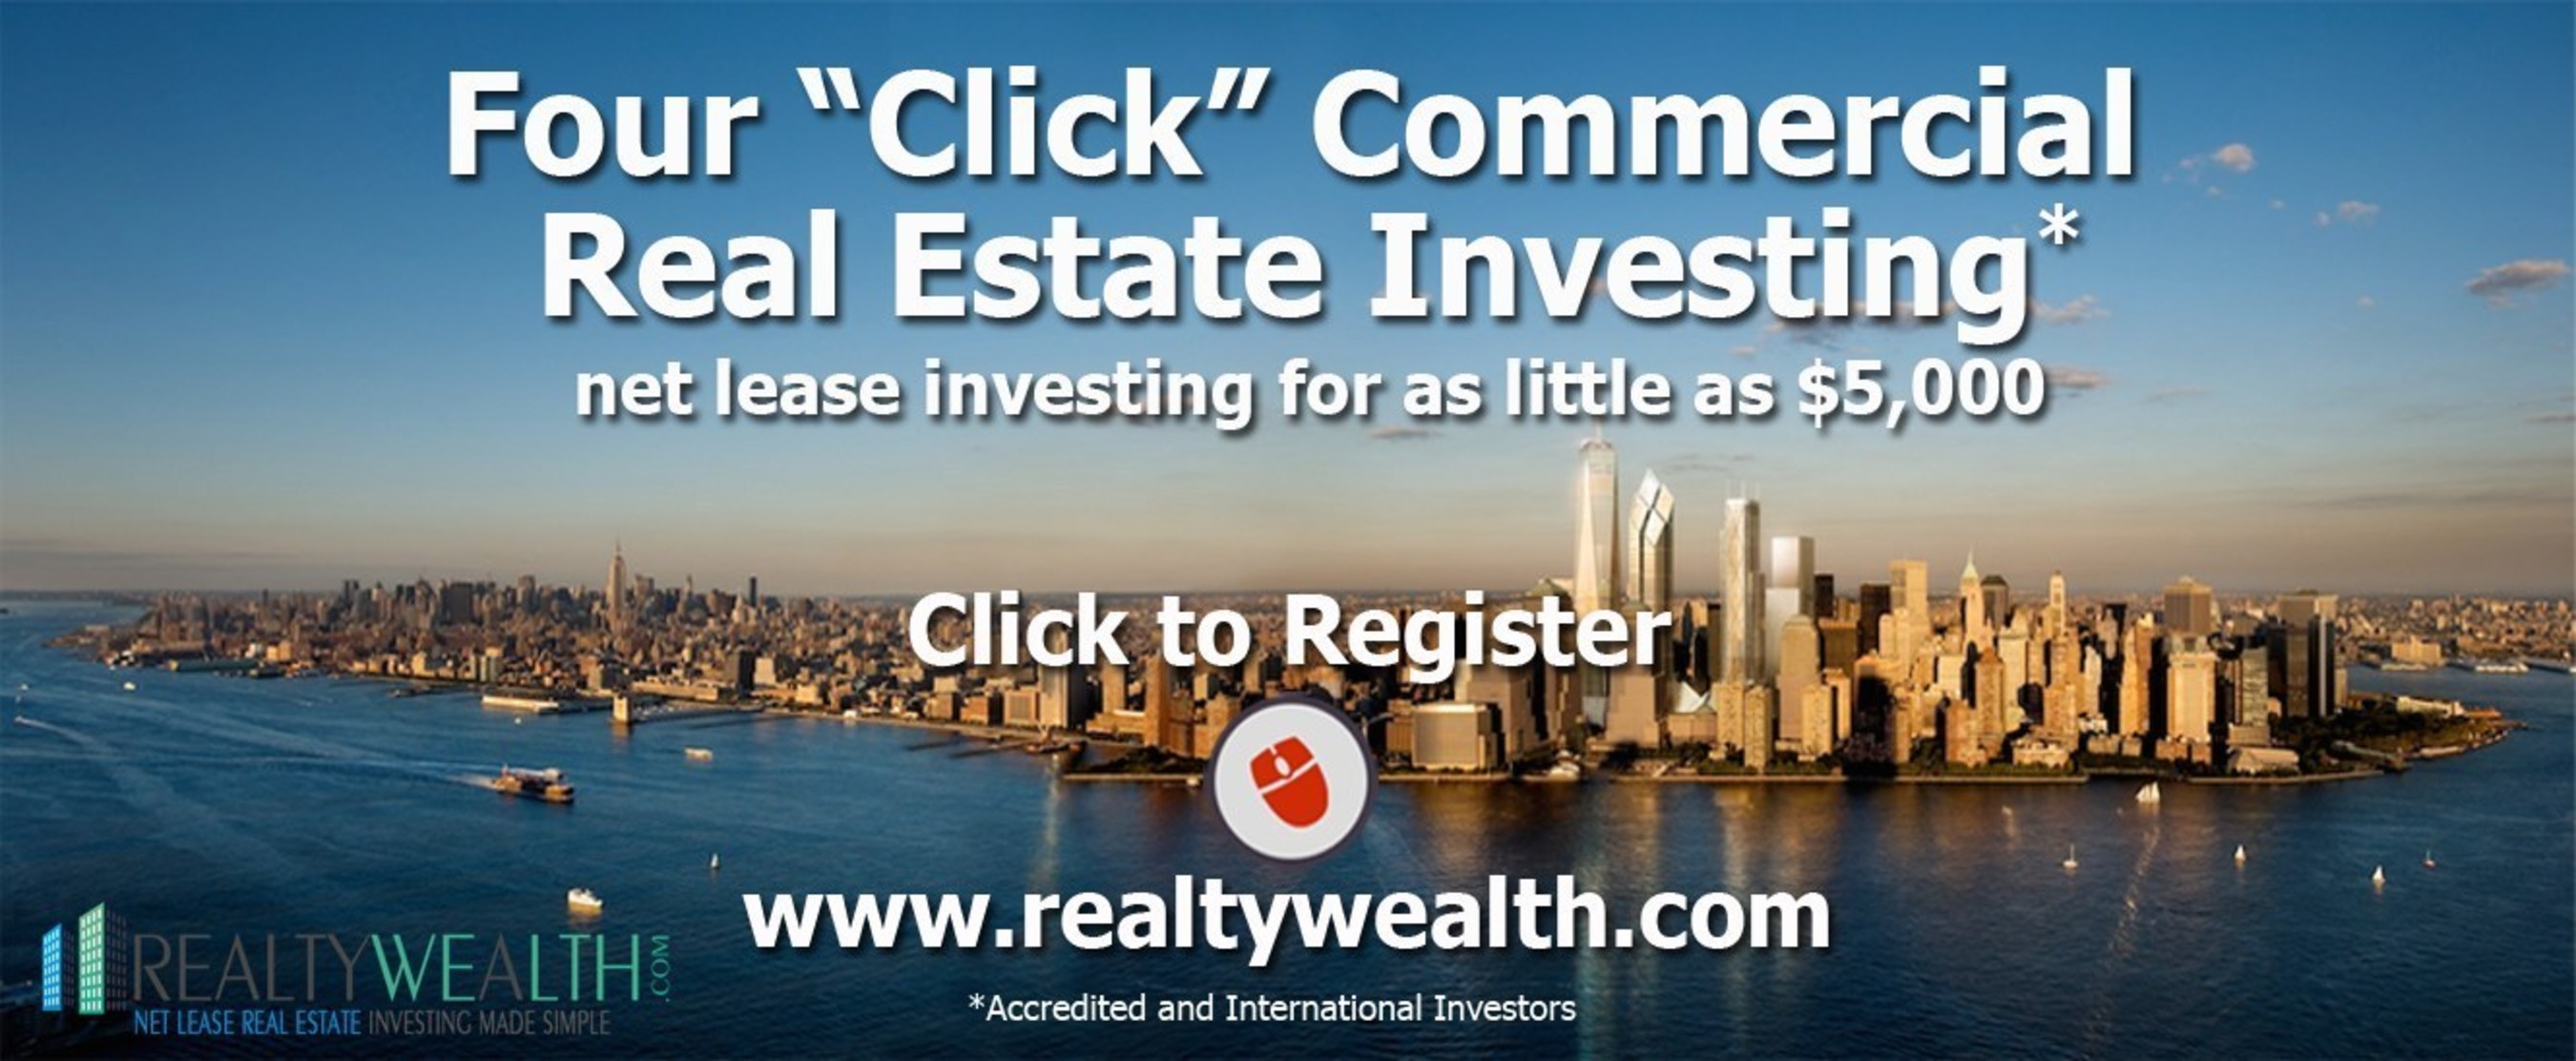 RealtyWealth.com's Proprietary Portal Offering "4-Click Investing"